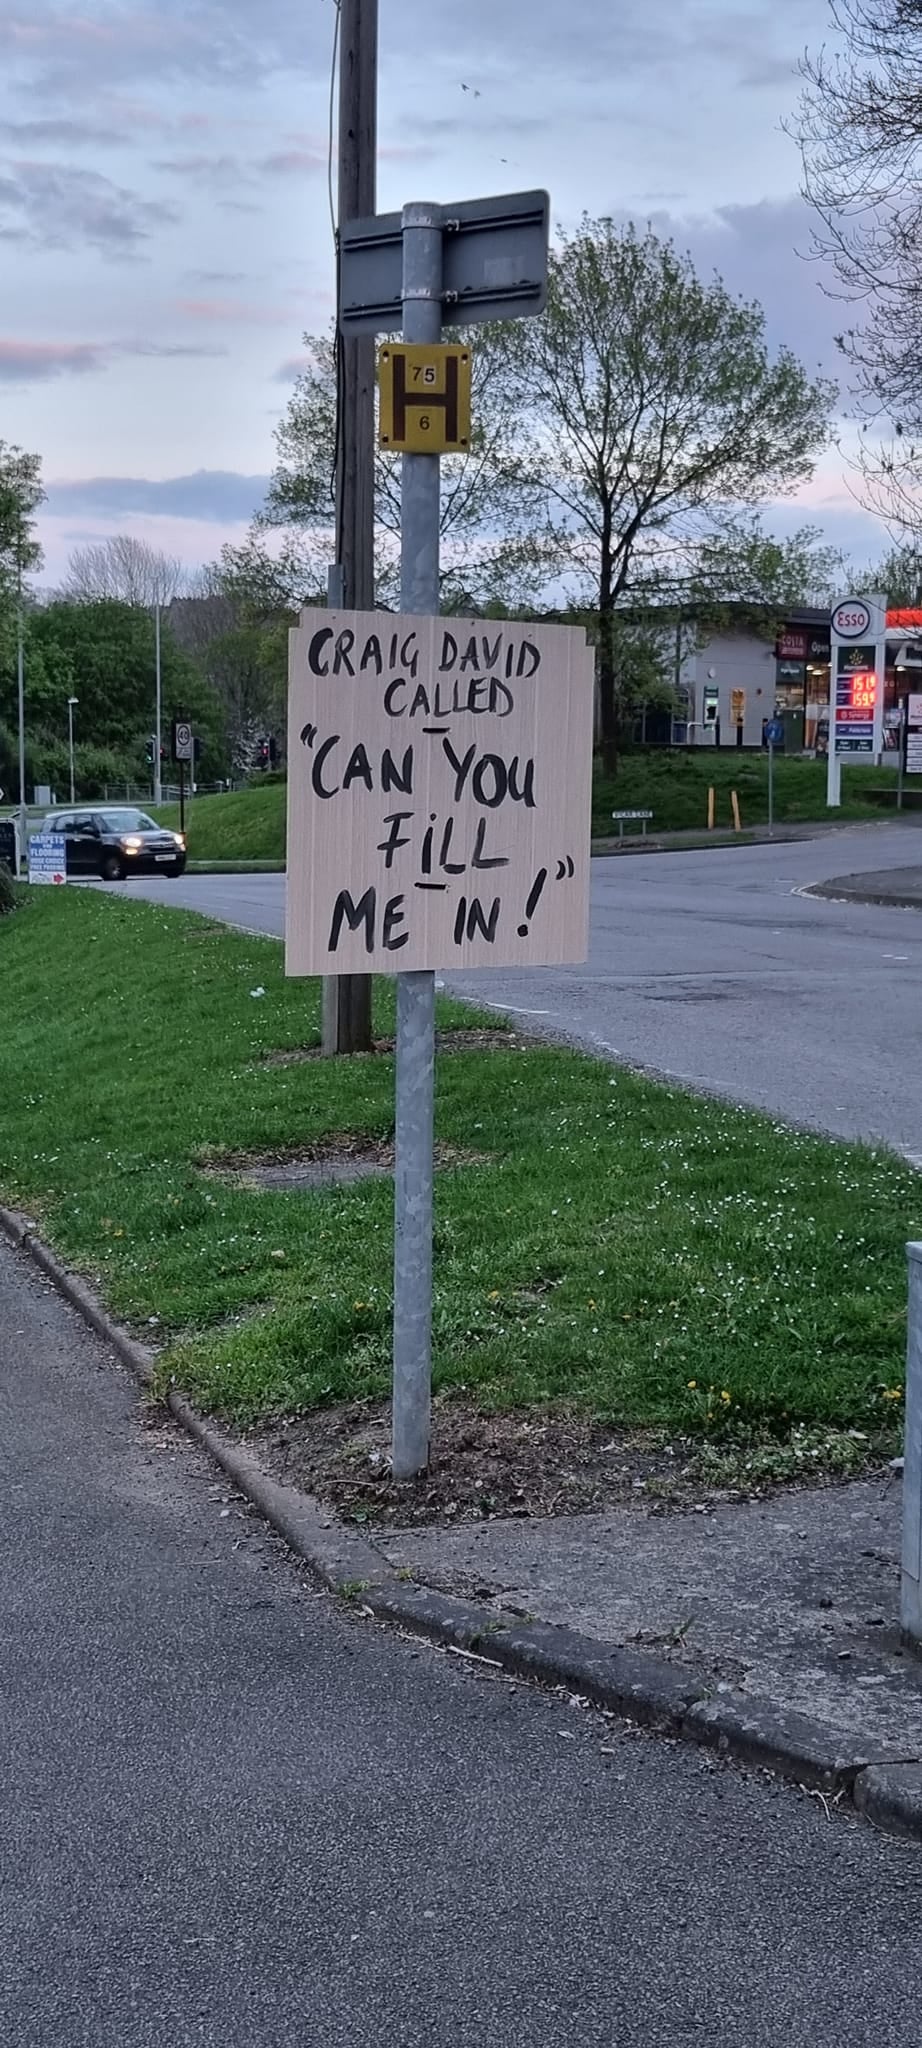 Playing on popular songs and cheeky references, signs that appeared on the roadside